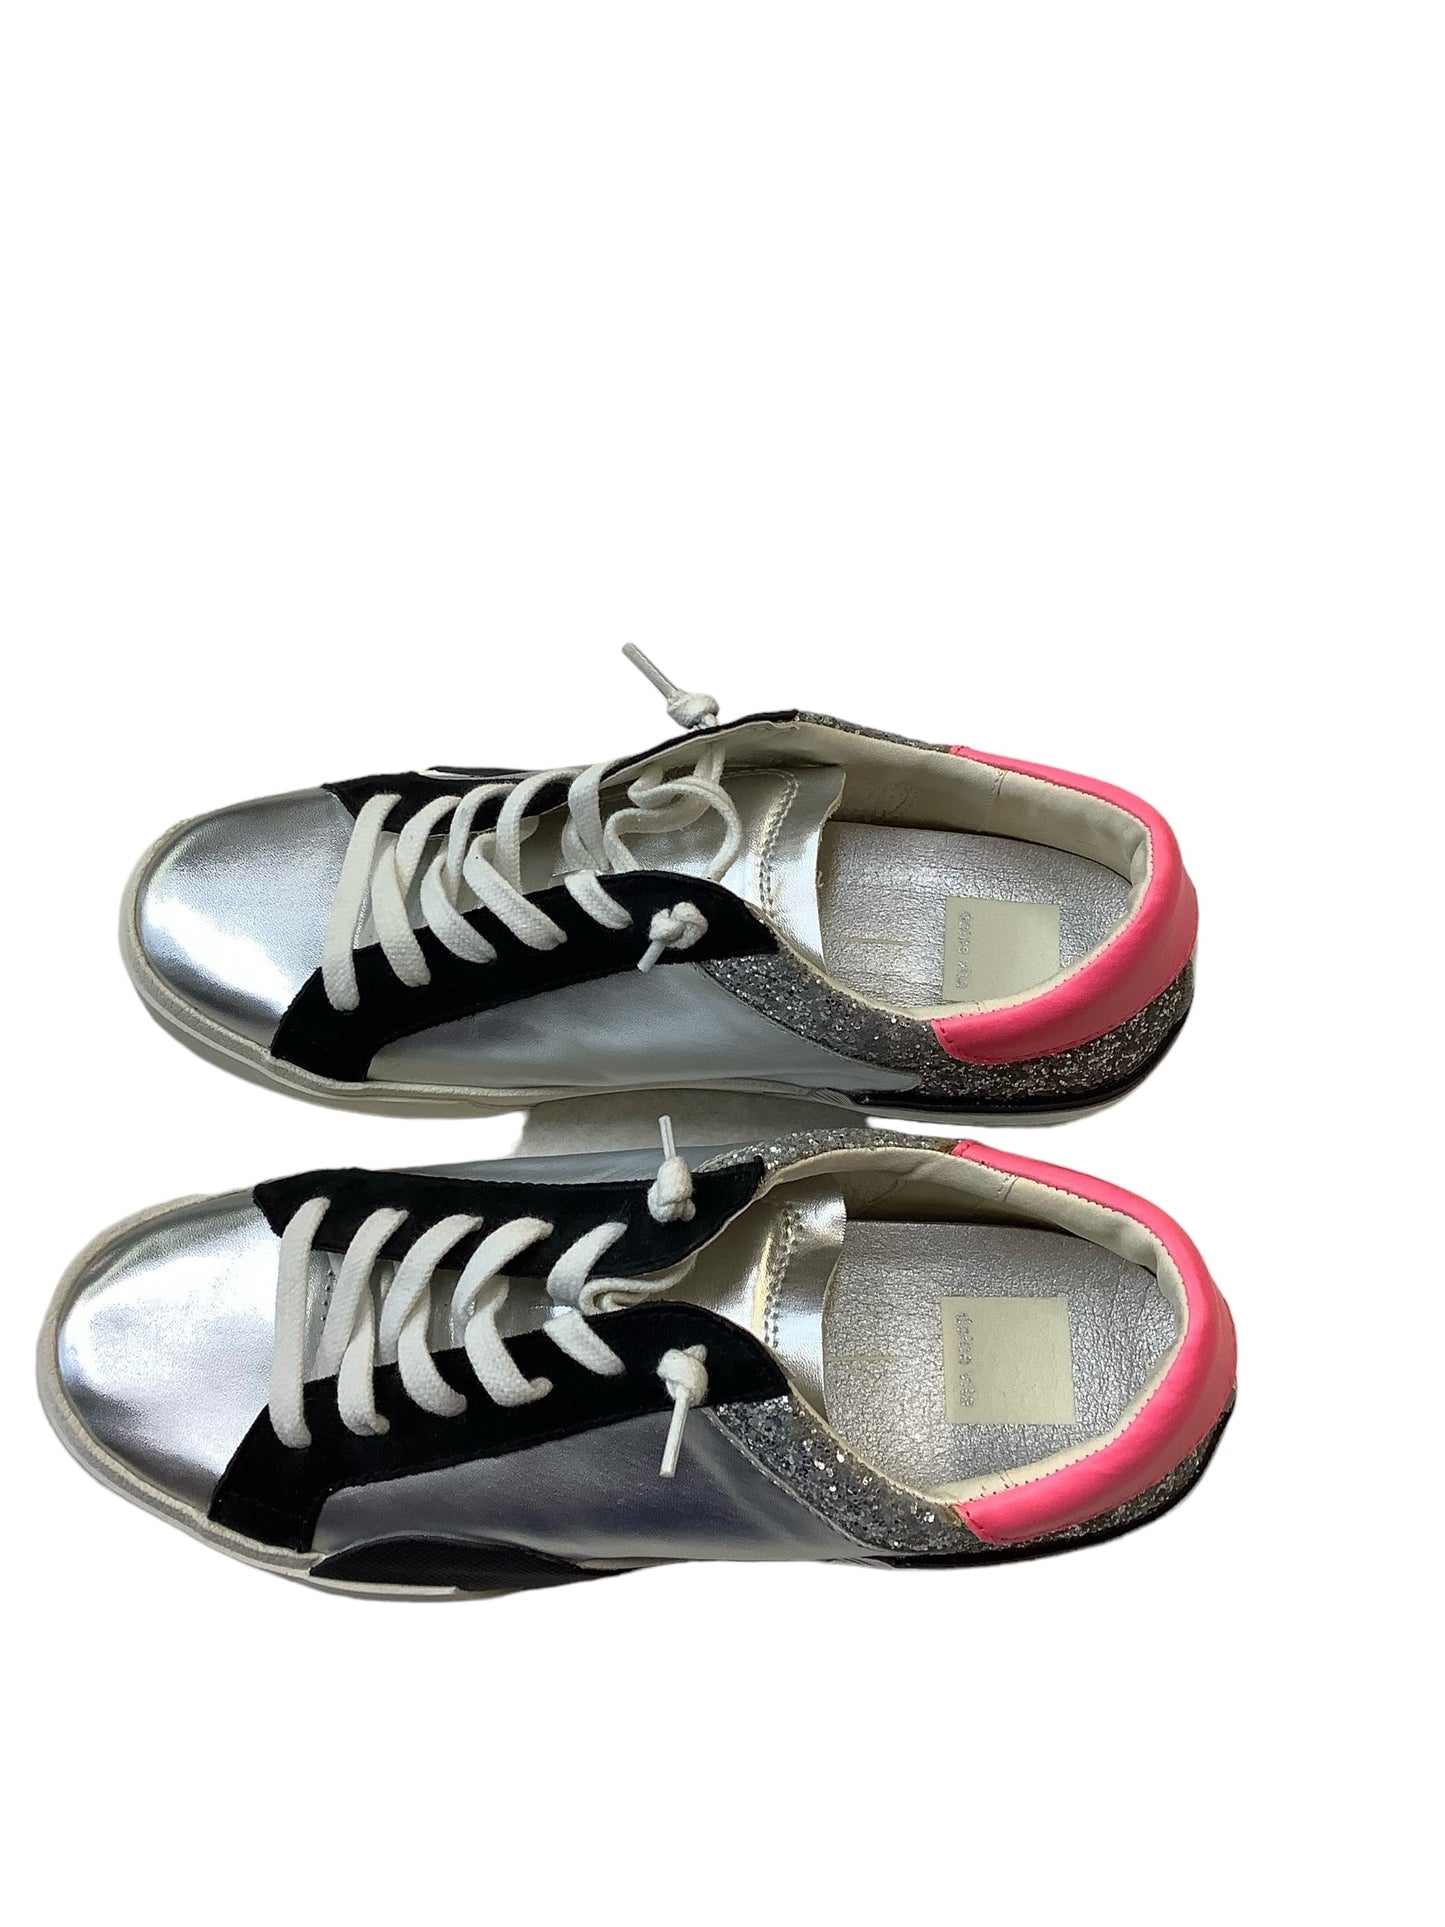 Silver Shoes Sneakers Dolce Vita, Size 8